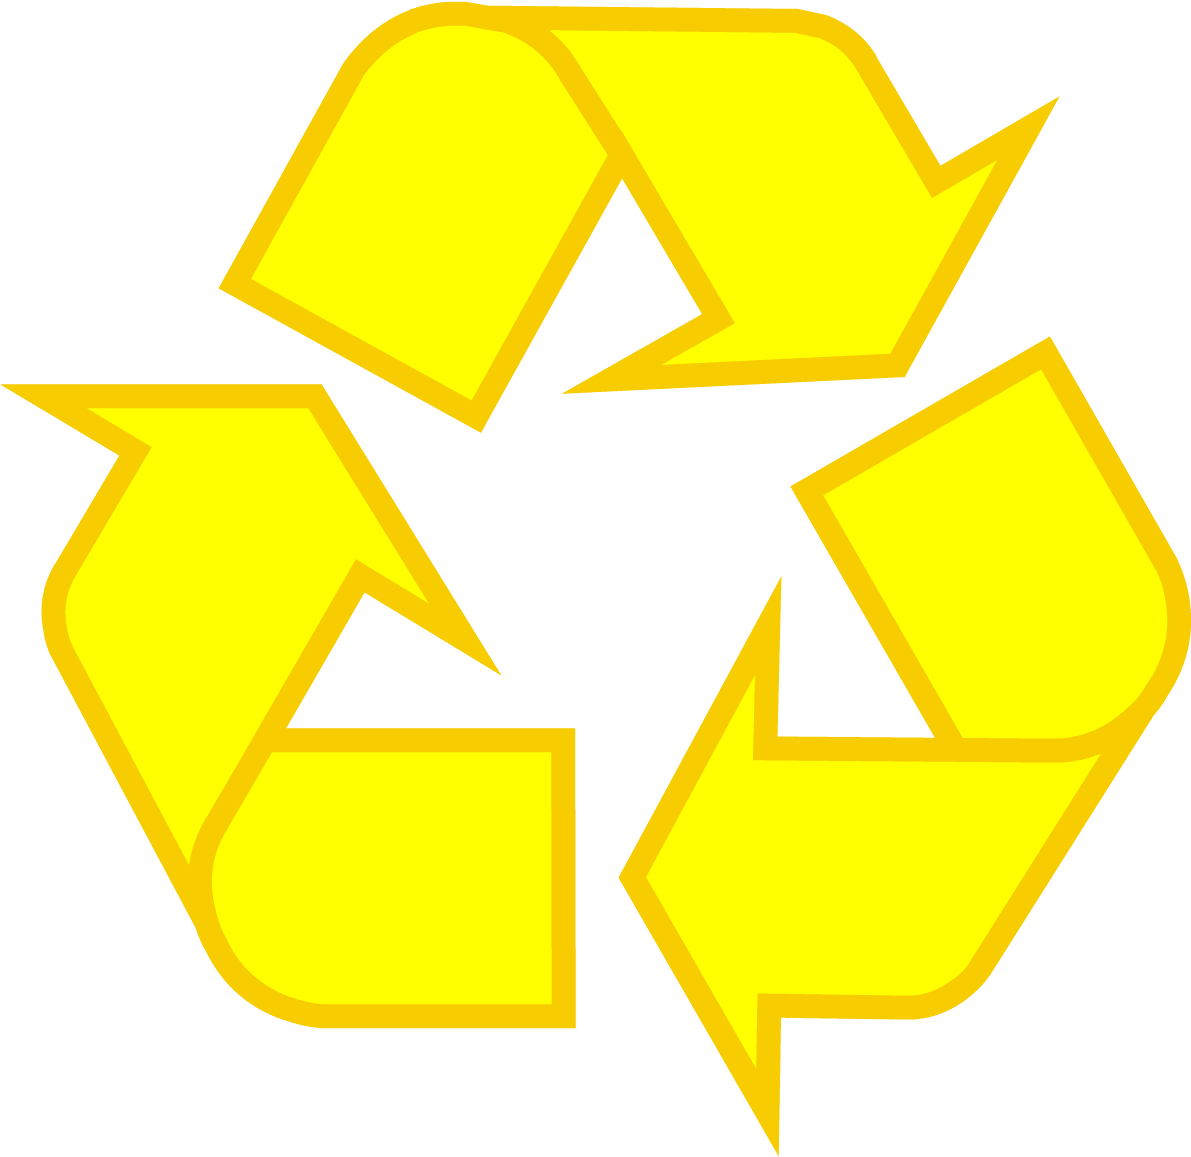 How To Draw Recycle Symbol - Reduce Reuse Recycle Png (1200x1171)